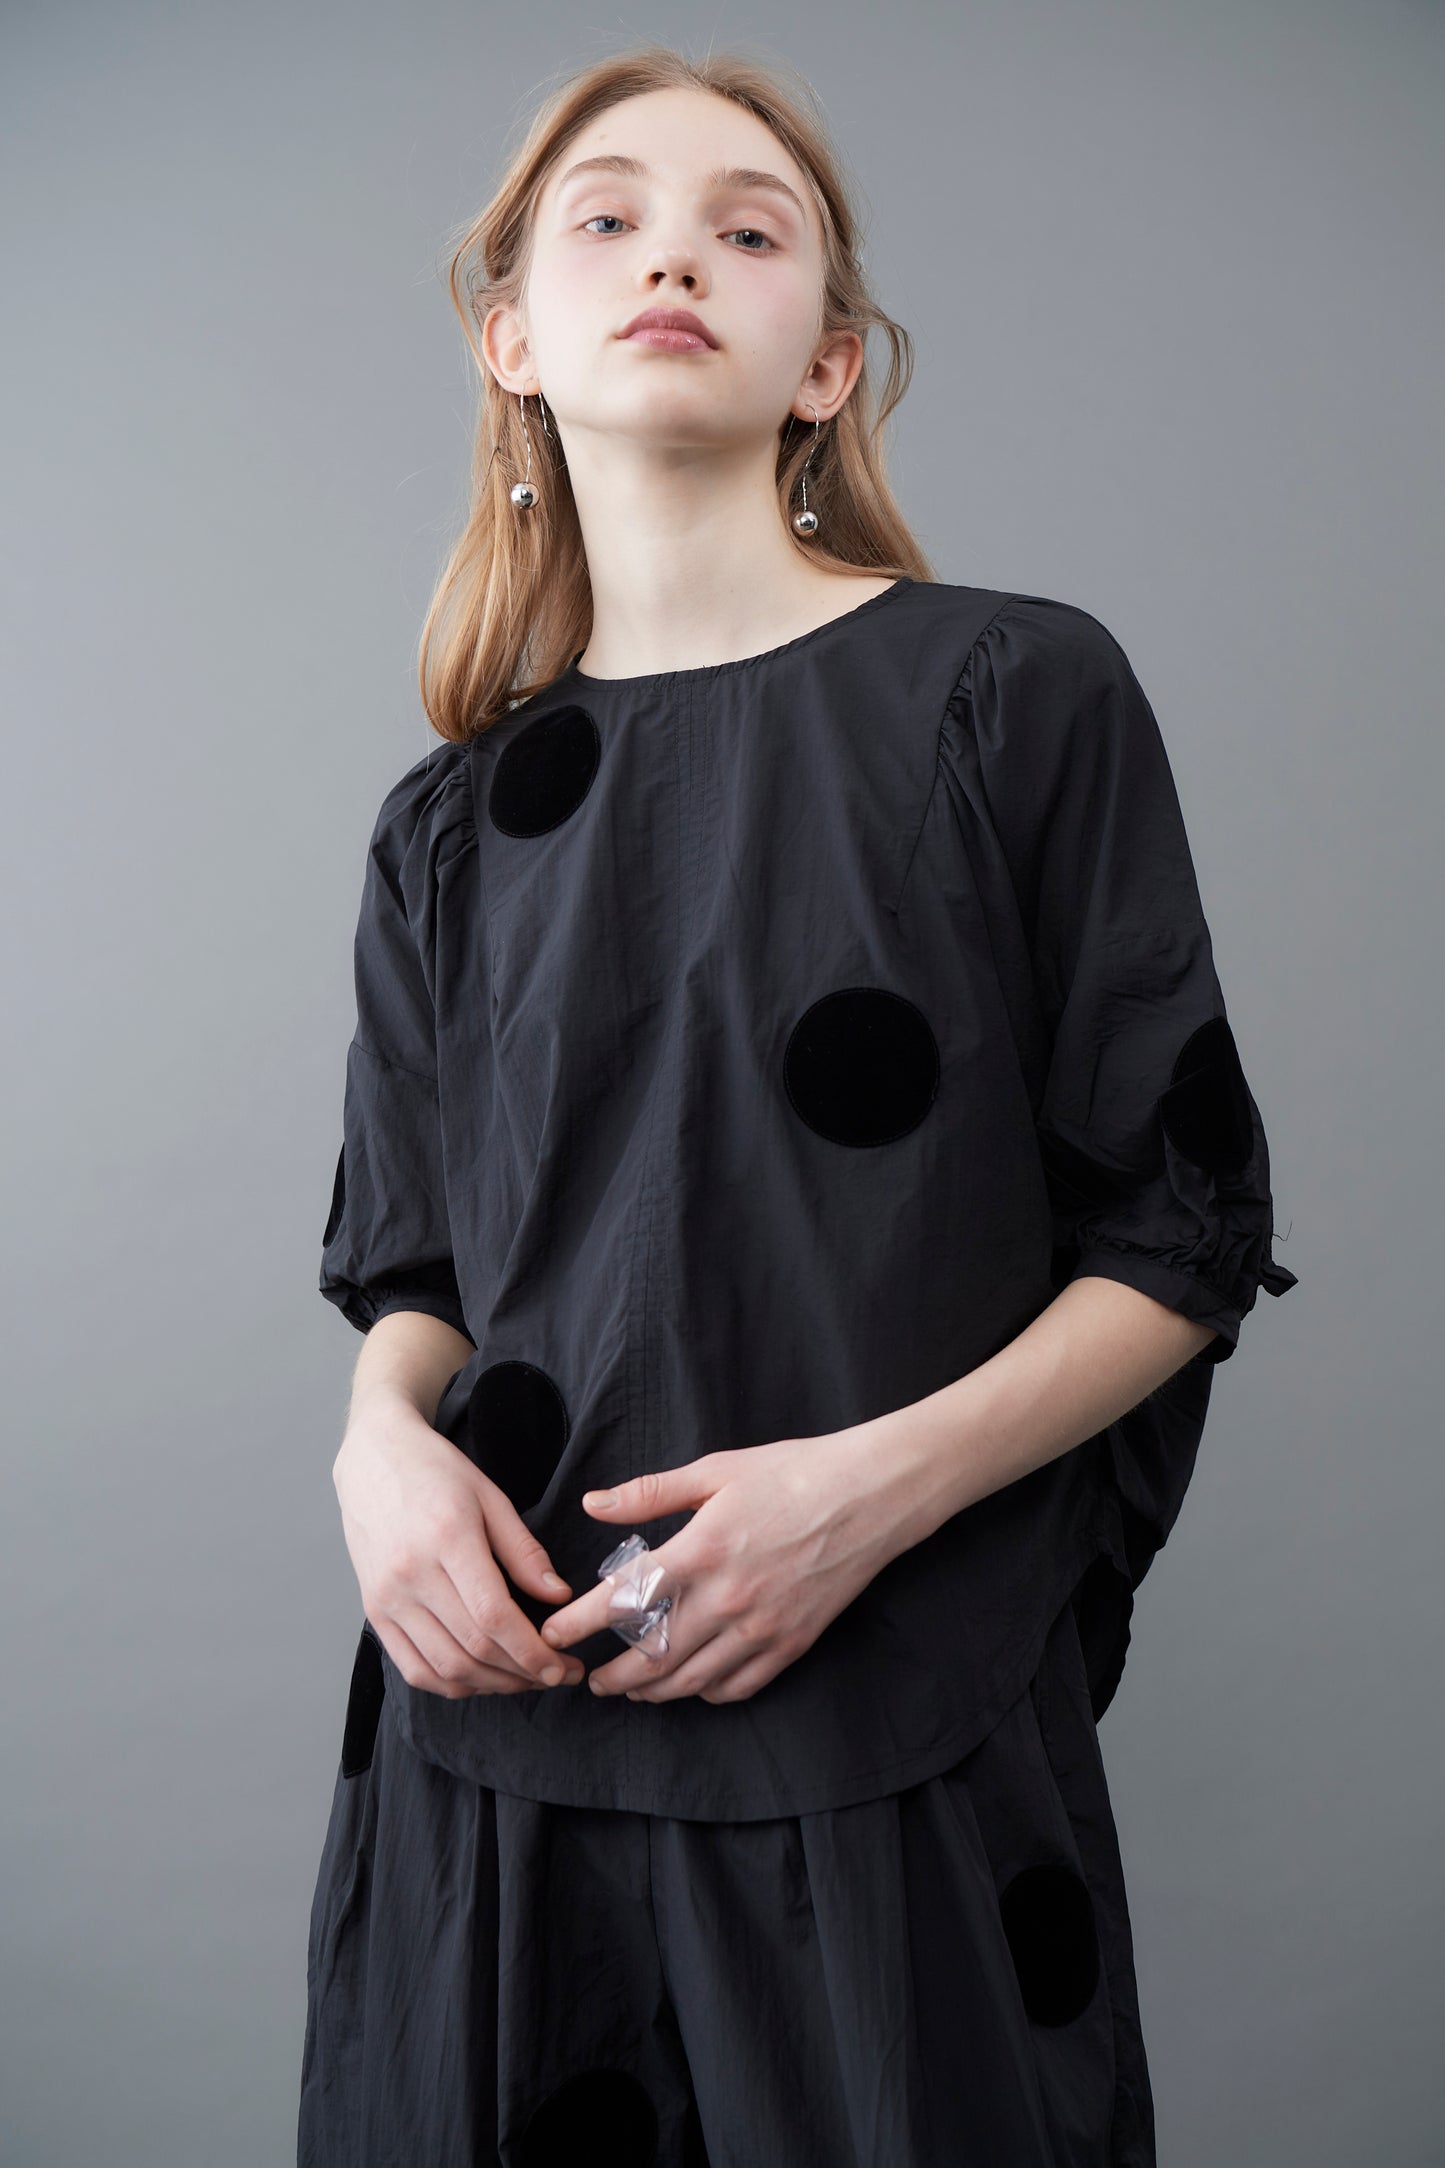 dot patched blouse